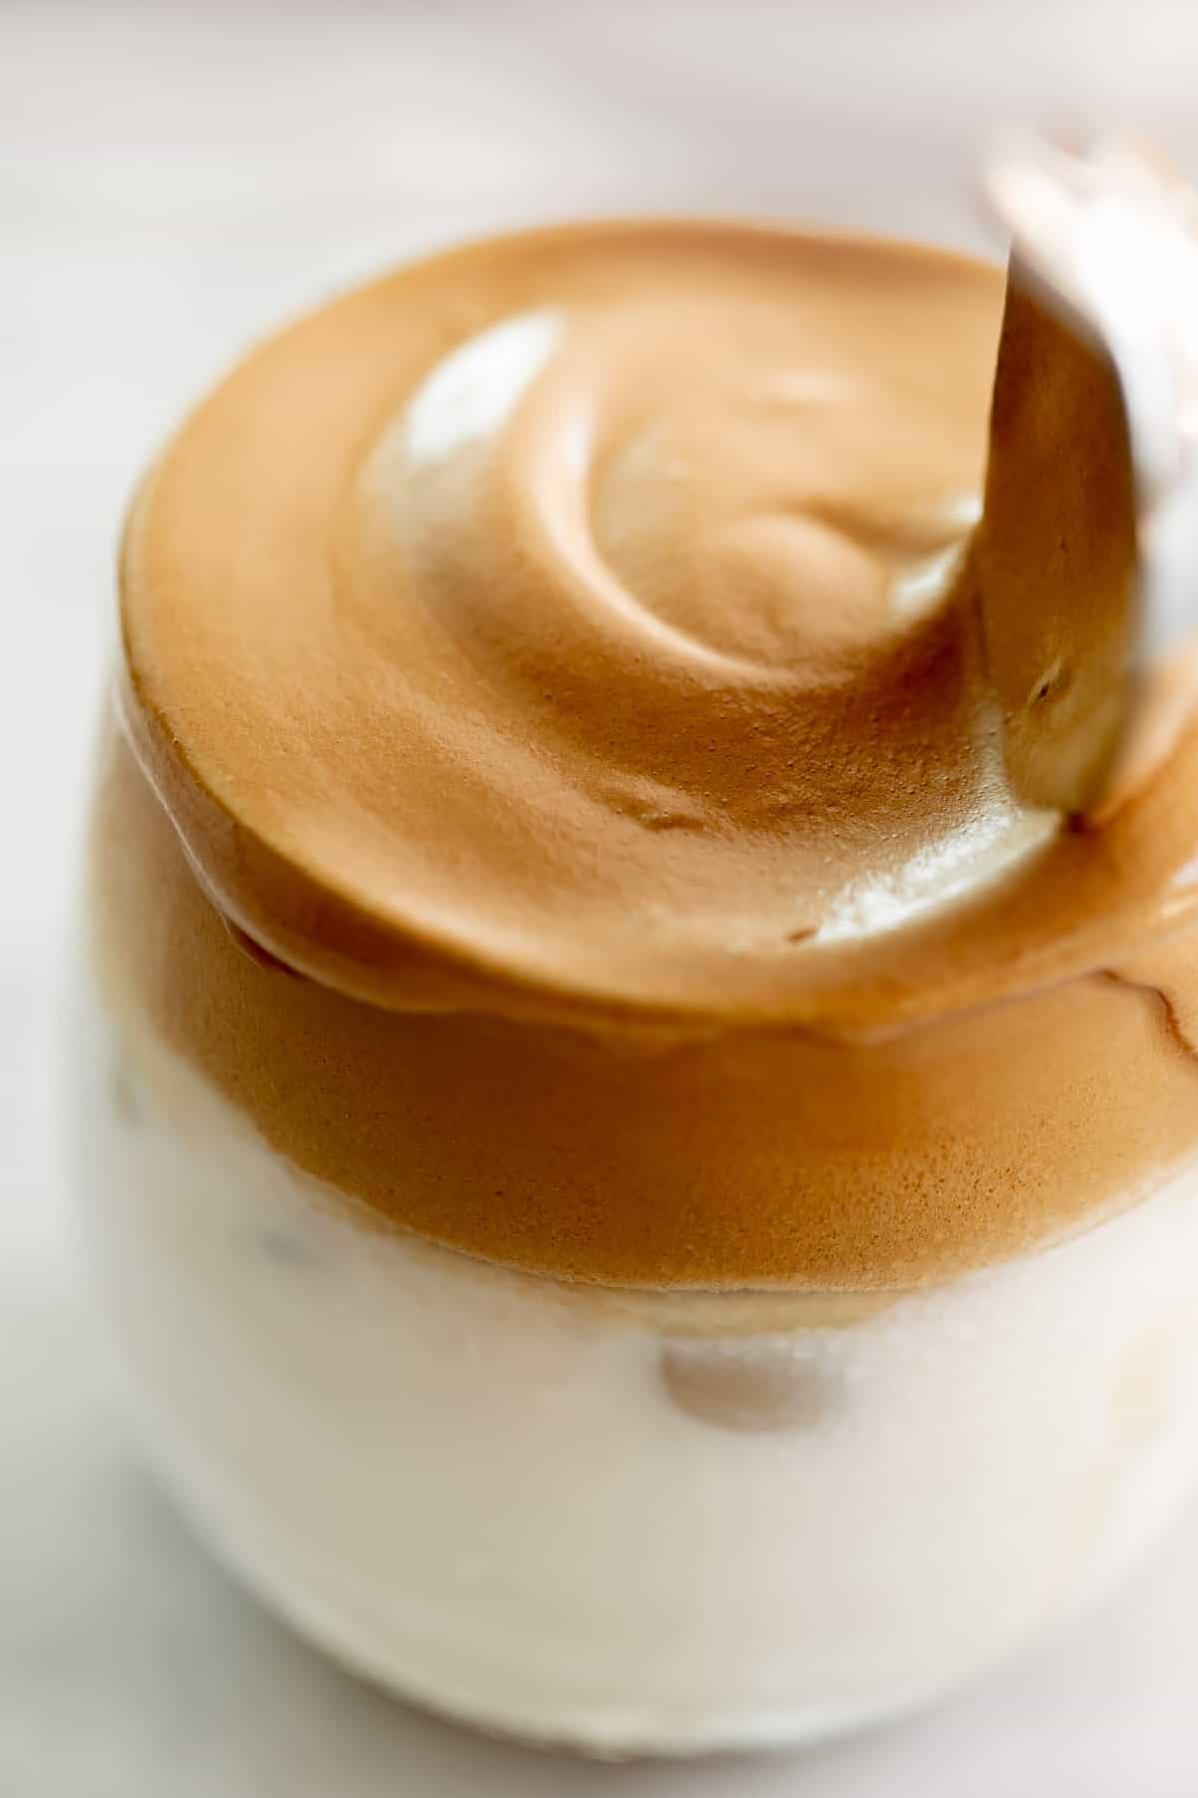  Double shot of espresso, who? Whipped coffee has arrived.